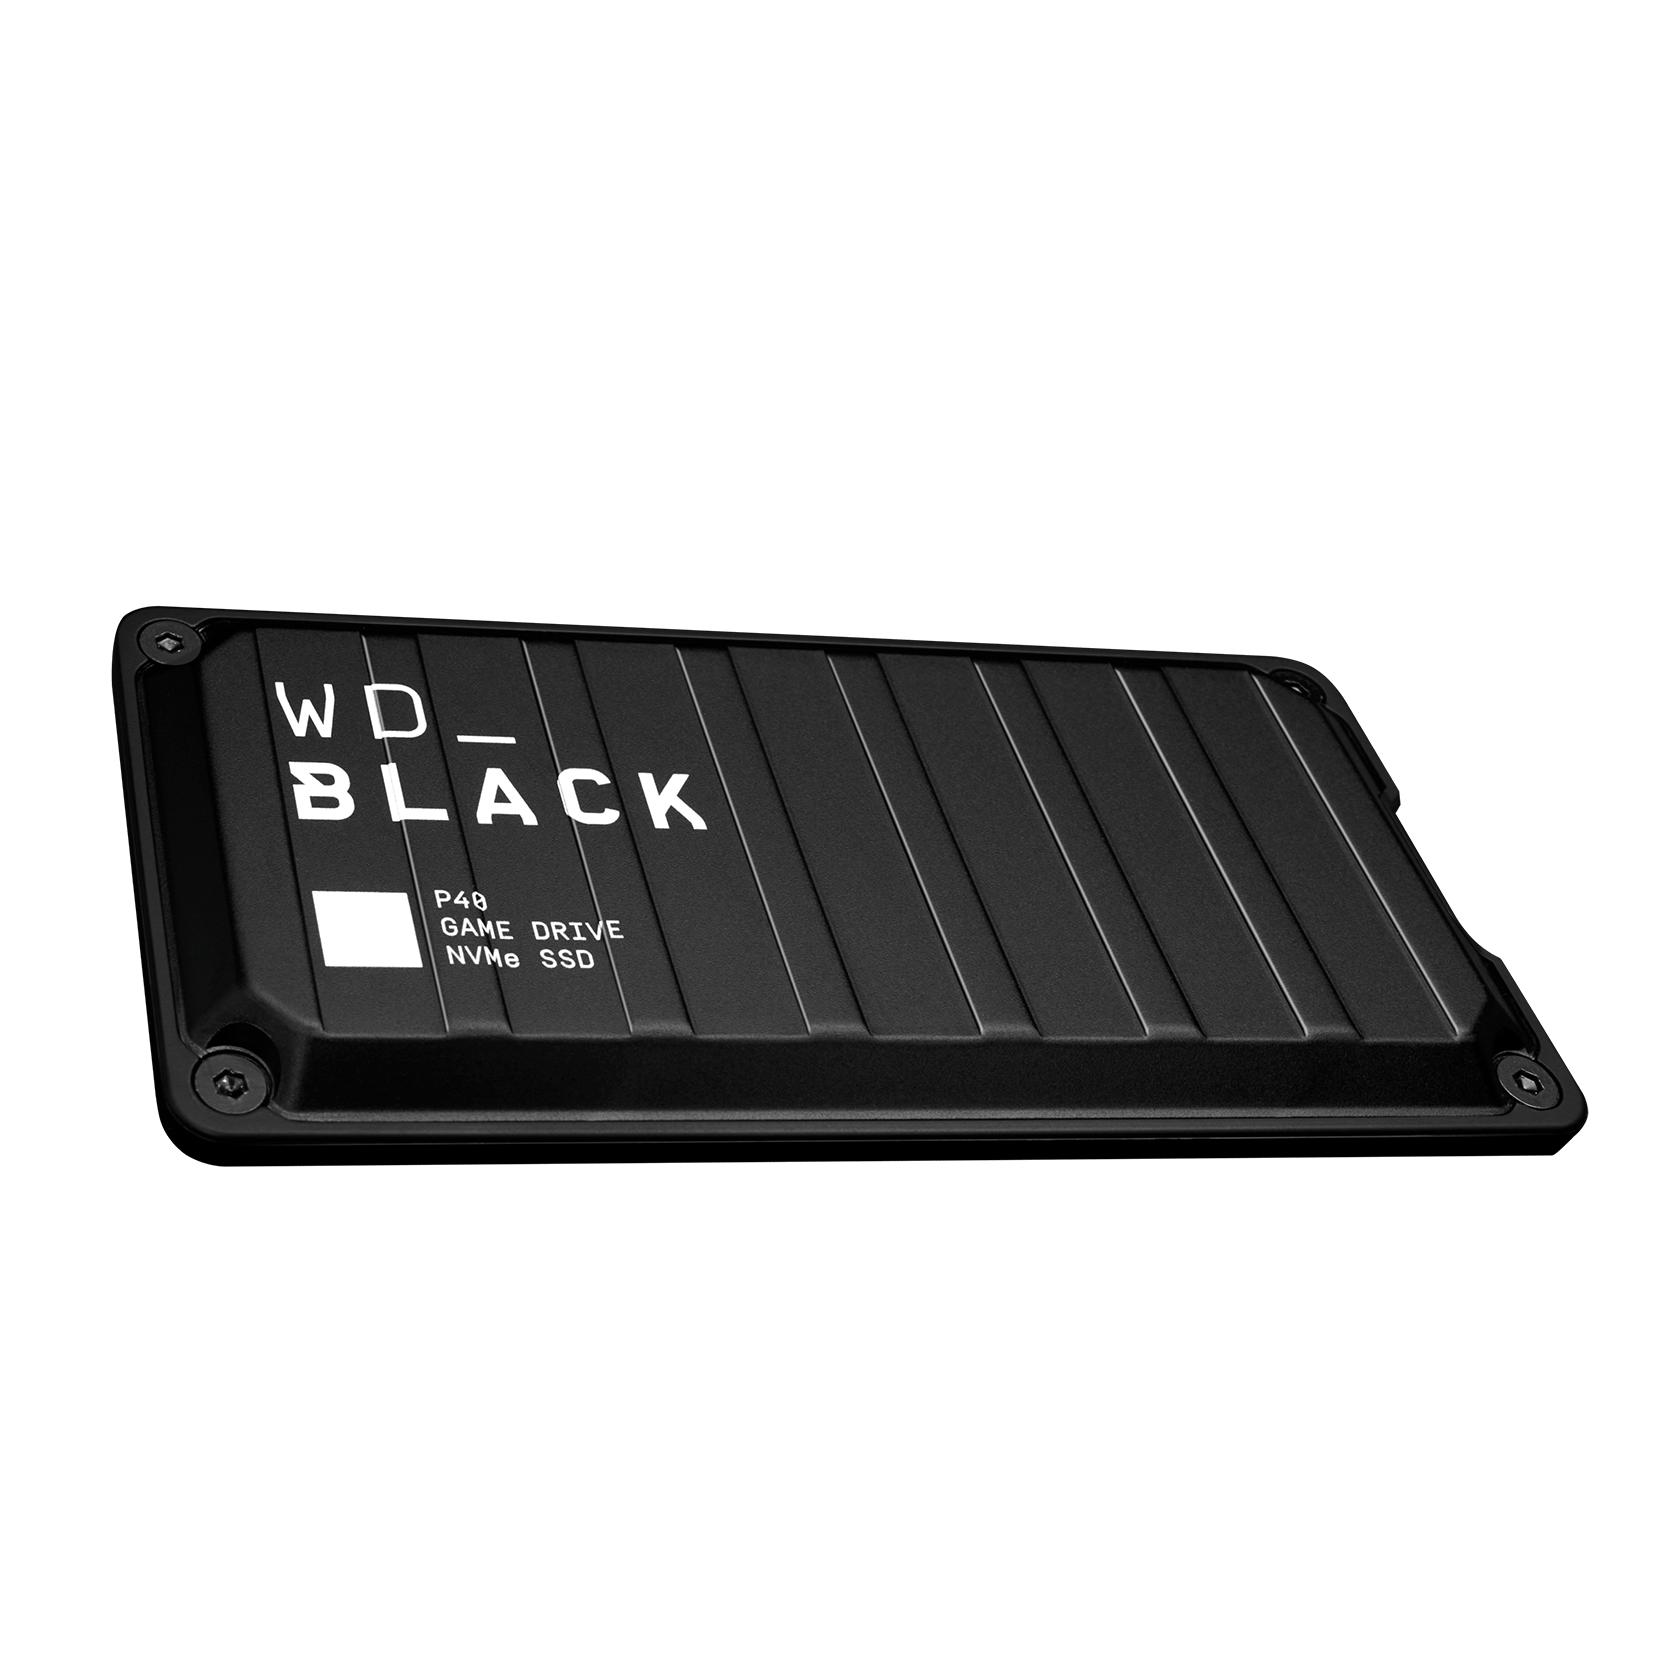 WD_BLACK 1TB P40 Game Drive SSD, Portable External Solid State Drive - WDBAWY0010BBK-WESN - image 1 of 4